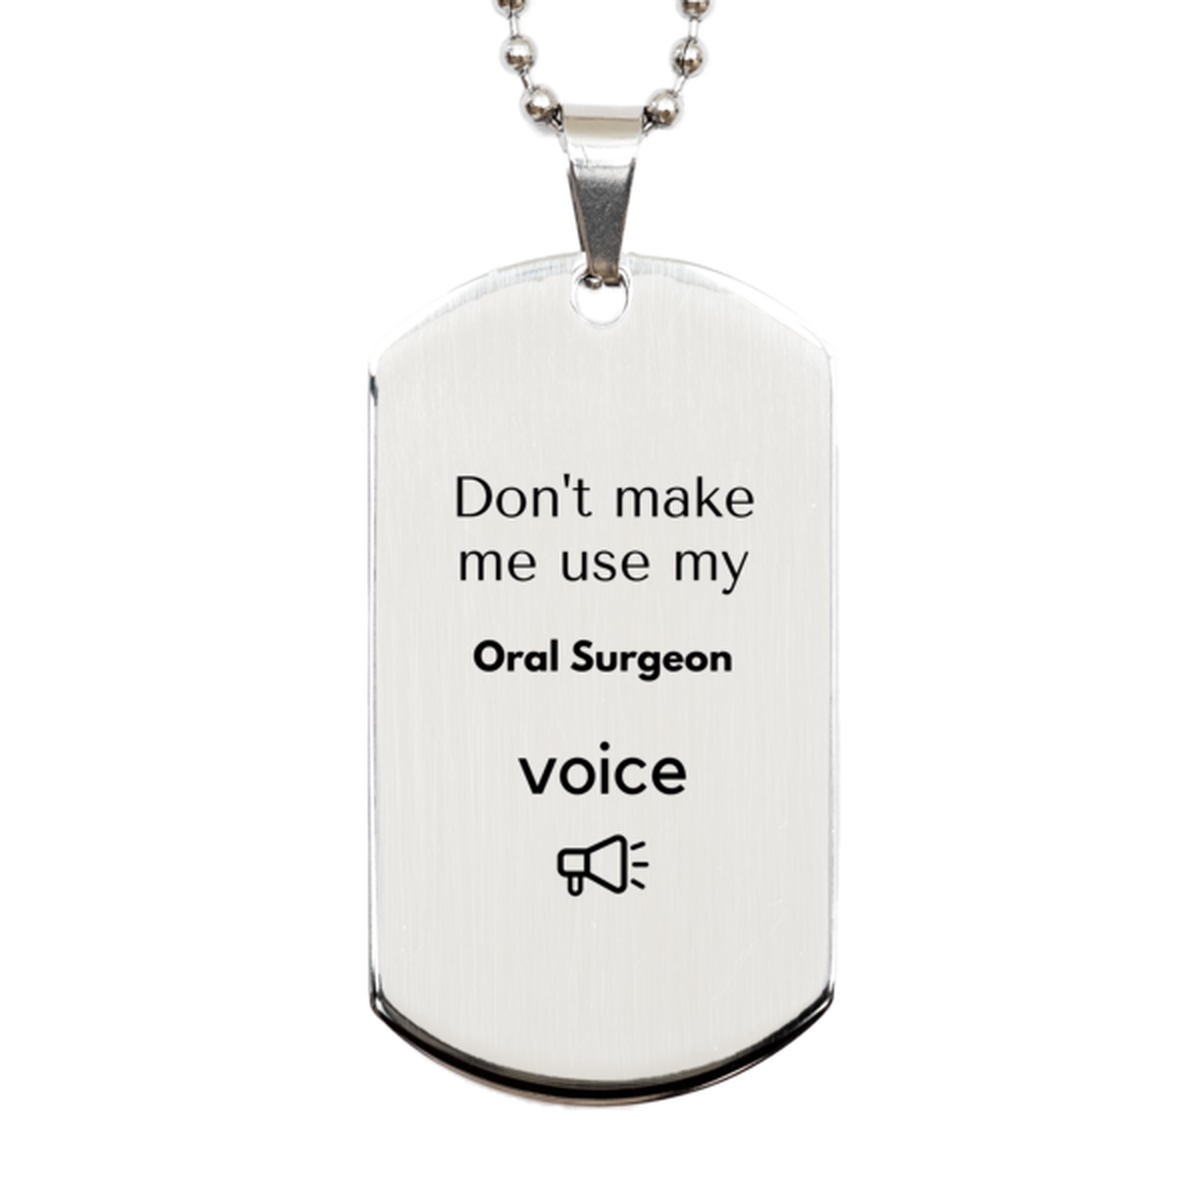 Don't make me use my Oral Surgeon voice, Sarcasm Oral Surgeon Gifts, Christmas Oral Surgeon Silver Dog Tag Birthday Unique Gifts For Oral Surgeon Coworkers, Men, Women, Colleague, Friends